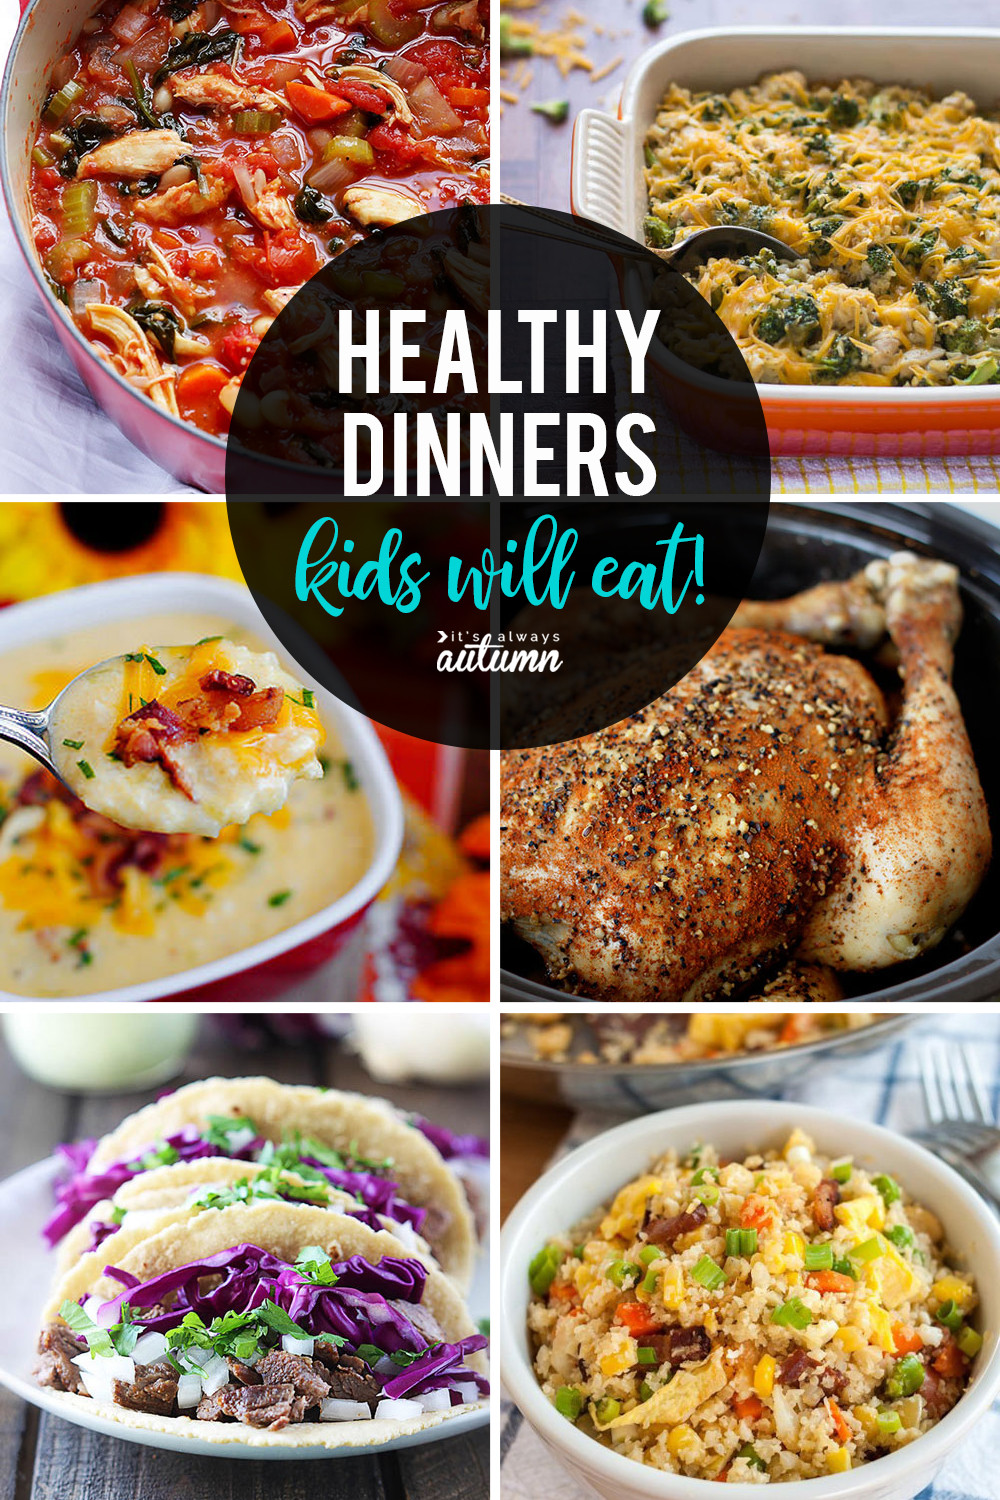 Easy Healthy Dinner Recipes For Kids
 20 healthy easy recipes your kids will actually want to